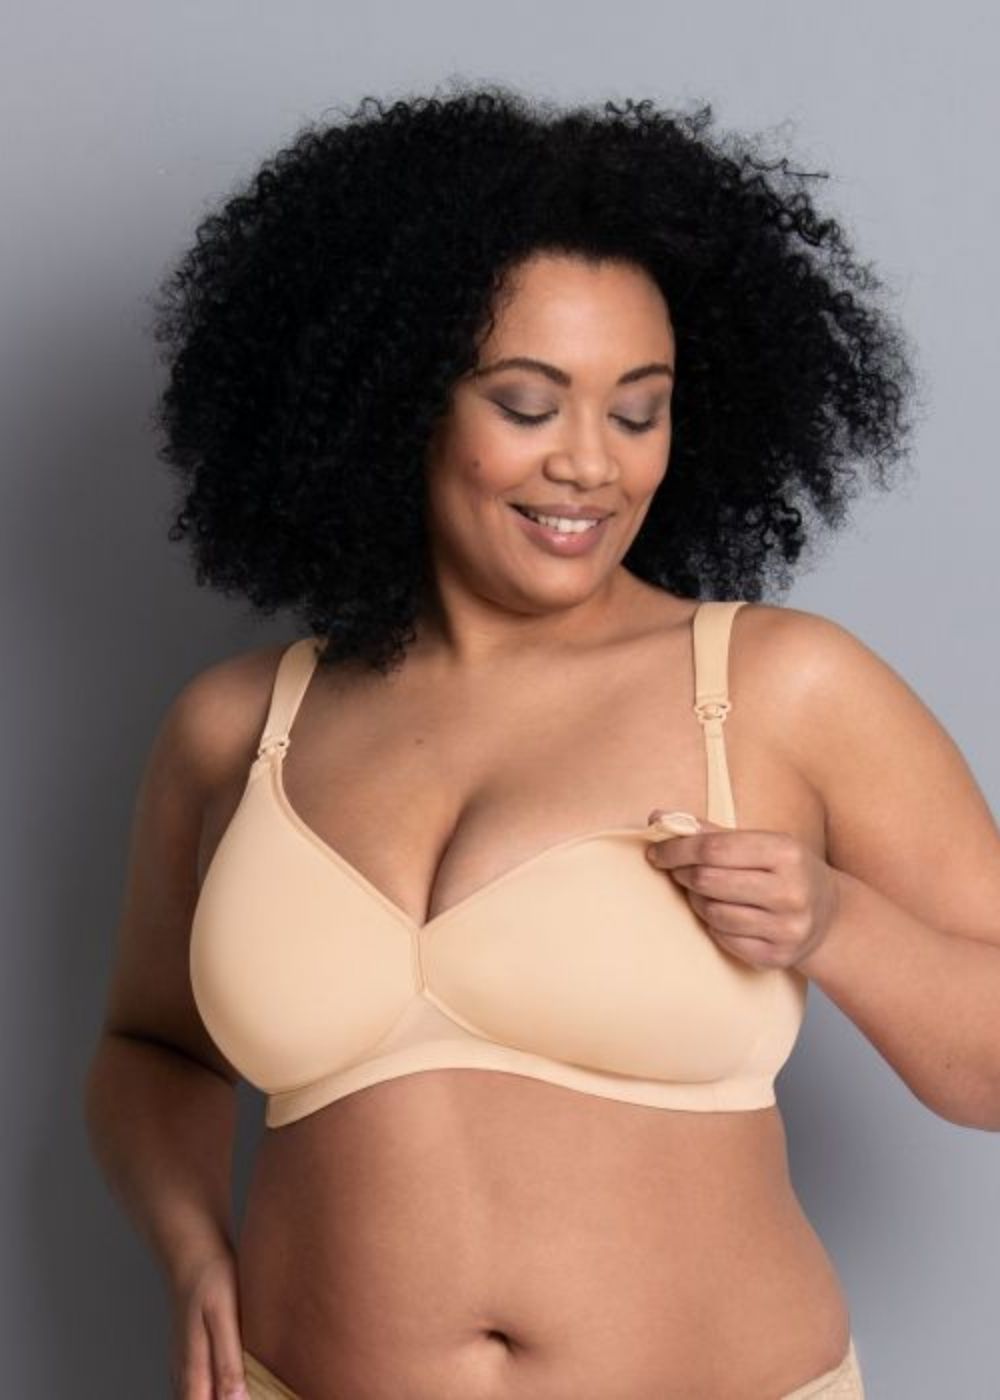 Miss Lovely Molded Cup Nursing Bra by Anita Maternity – Special